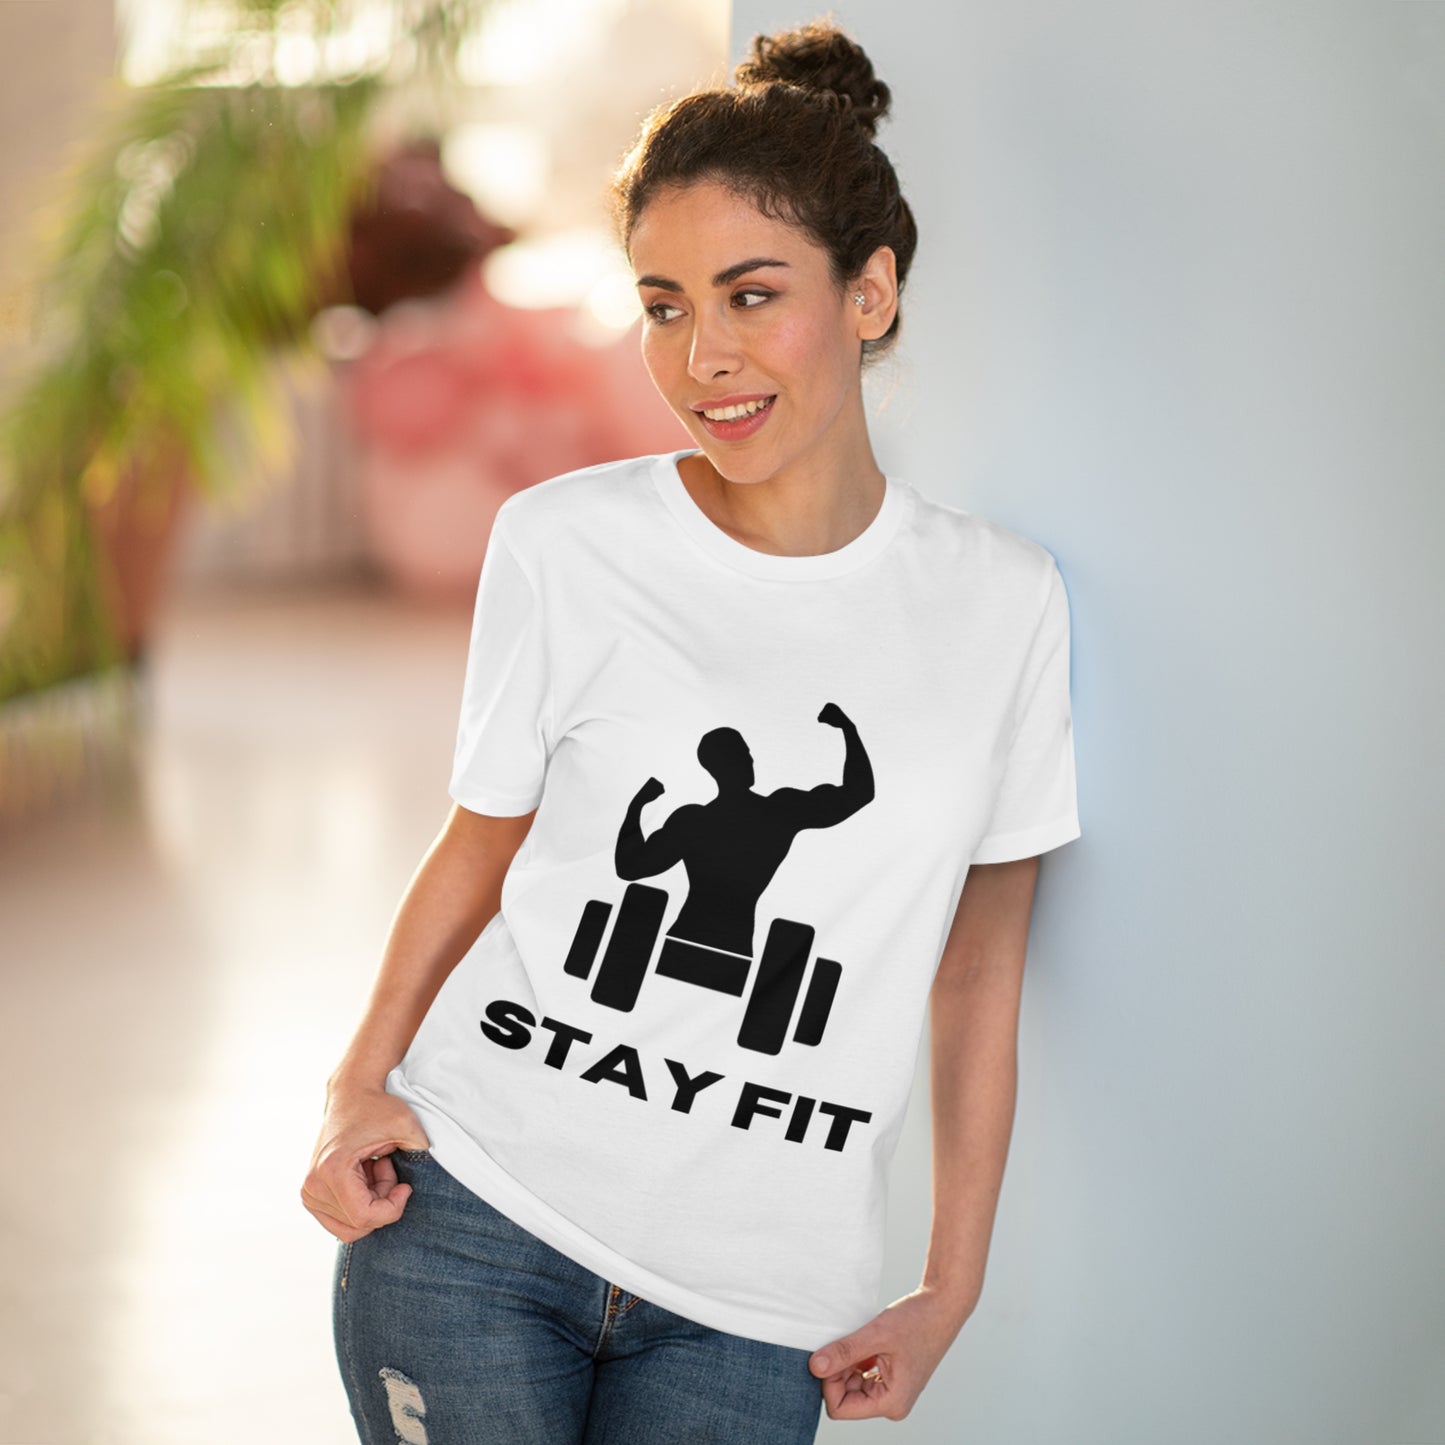 Muscle Up Motivation Shirt "STAY FIT" T-shirt - Unisex